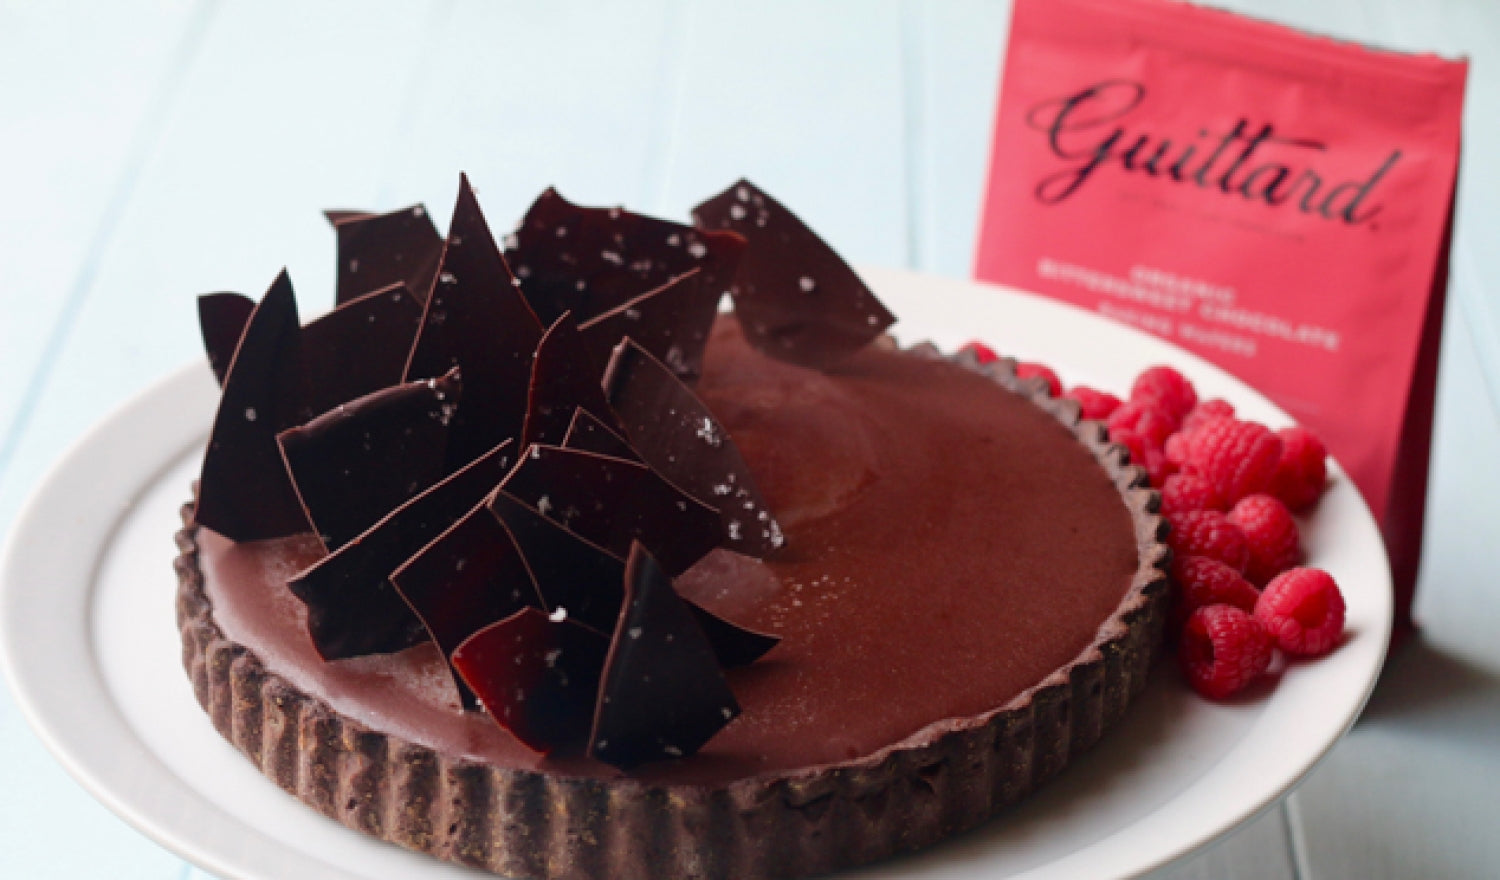 Will Torrent's Salted Caramel And Chocolate Tart Recipe